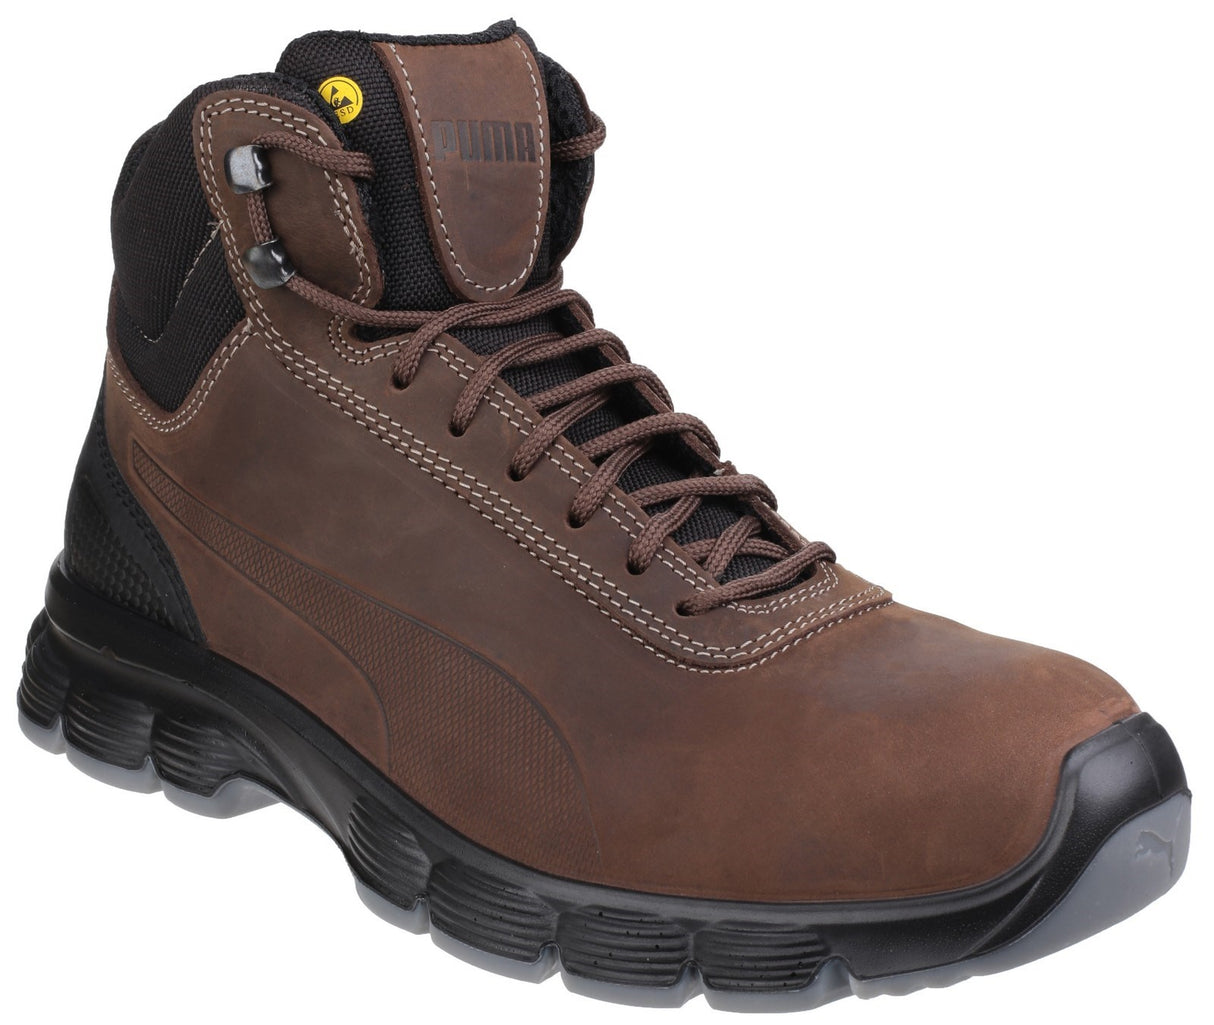 Puma Safety Condor Mid Safety Boots